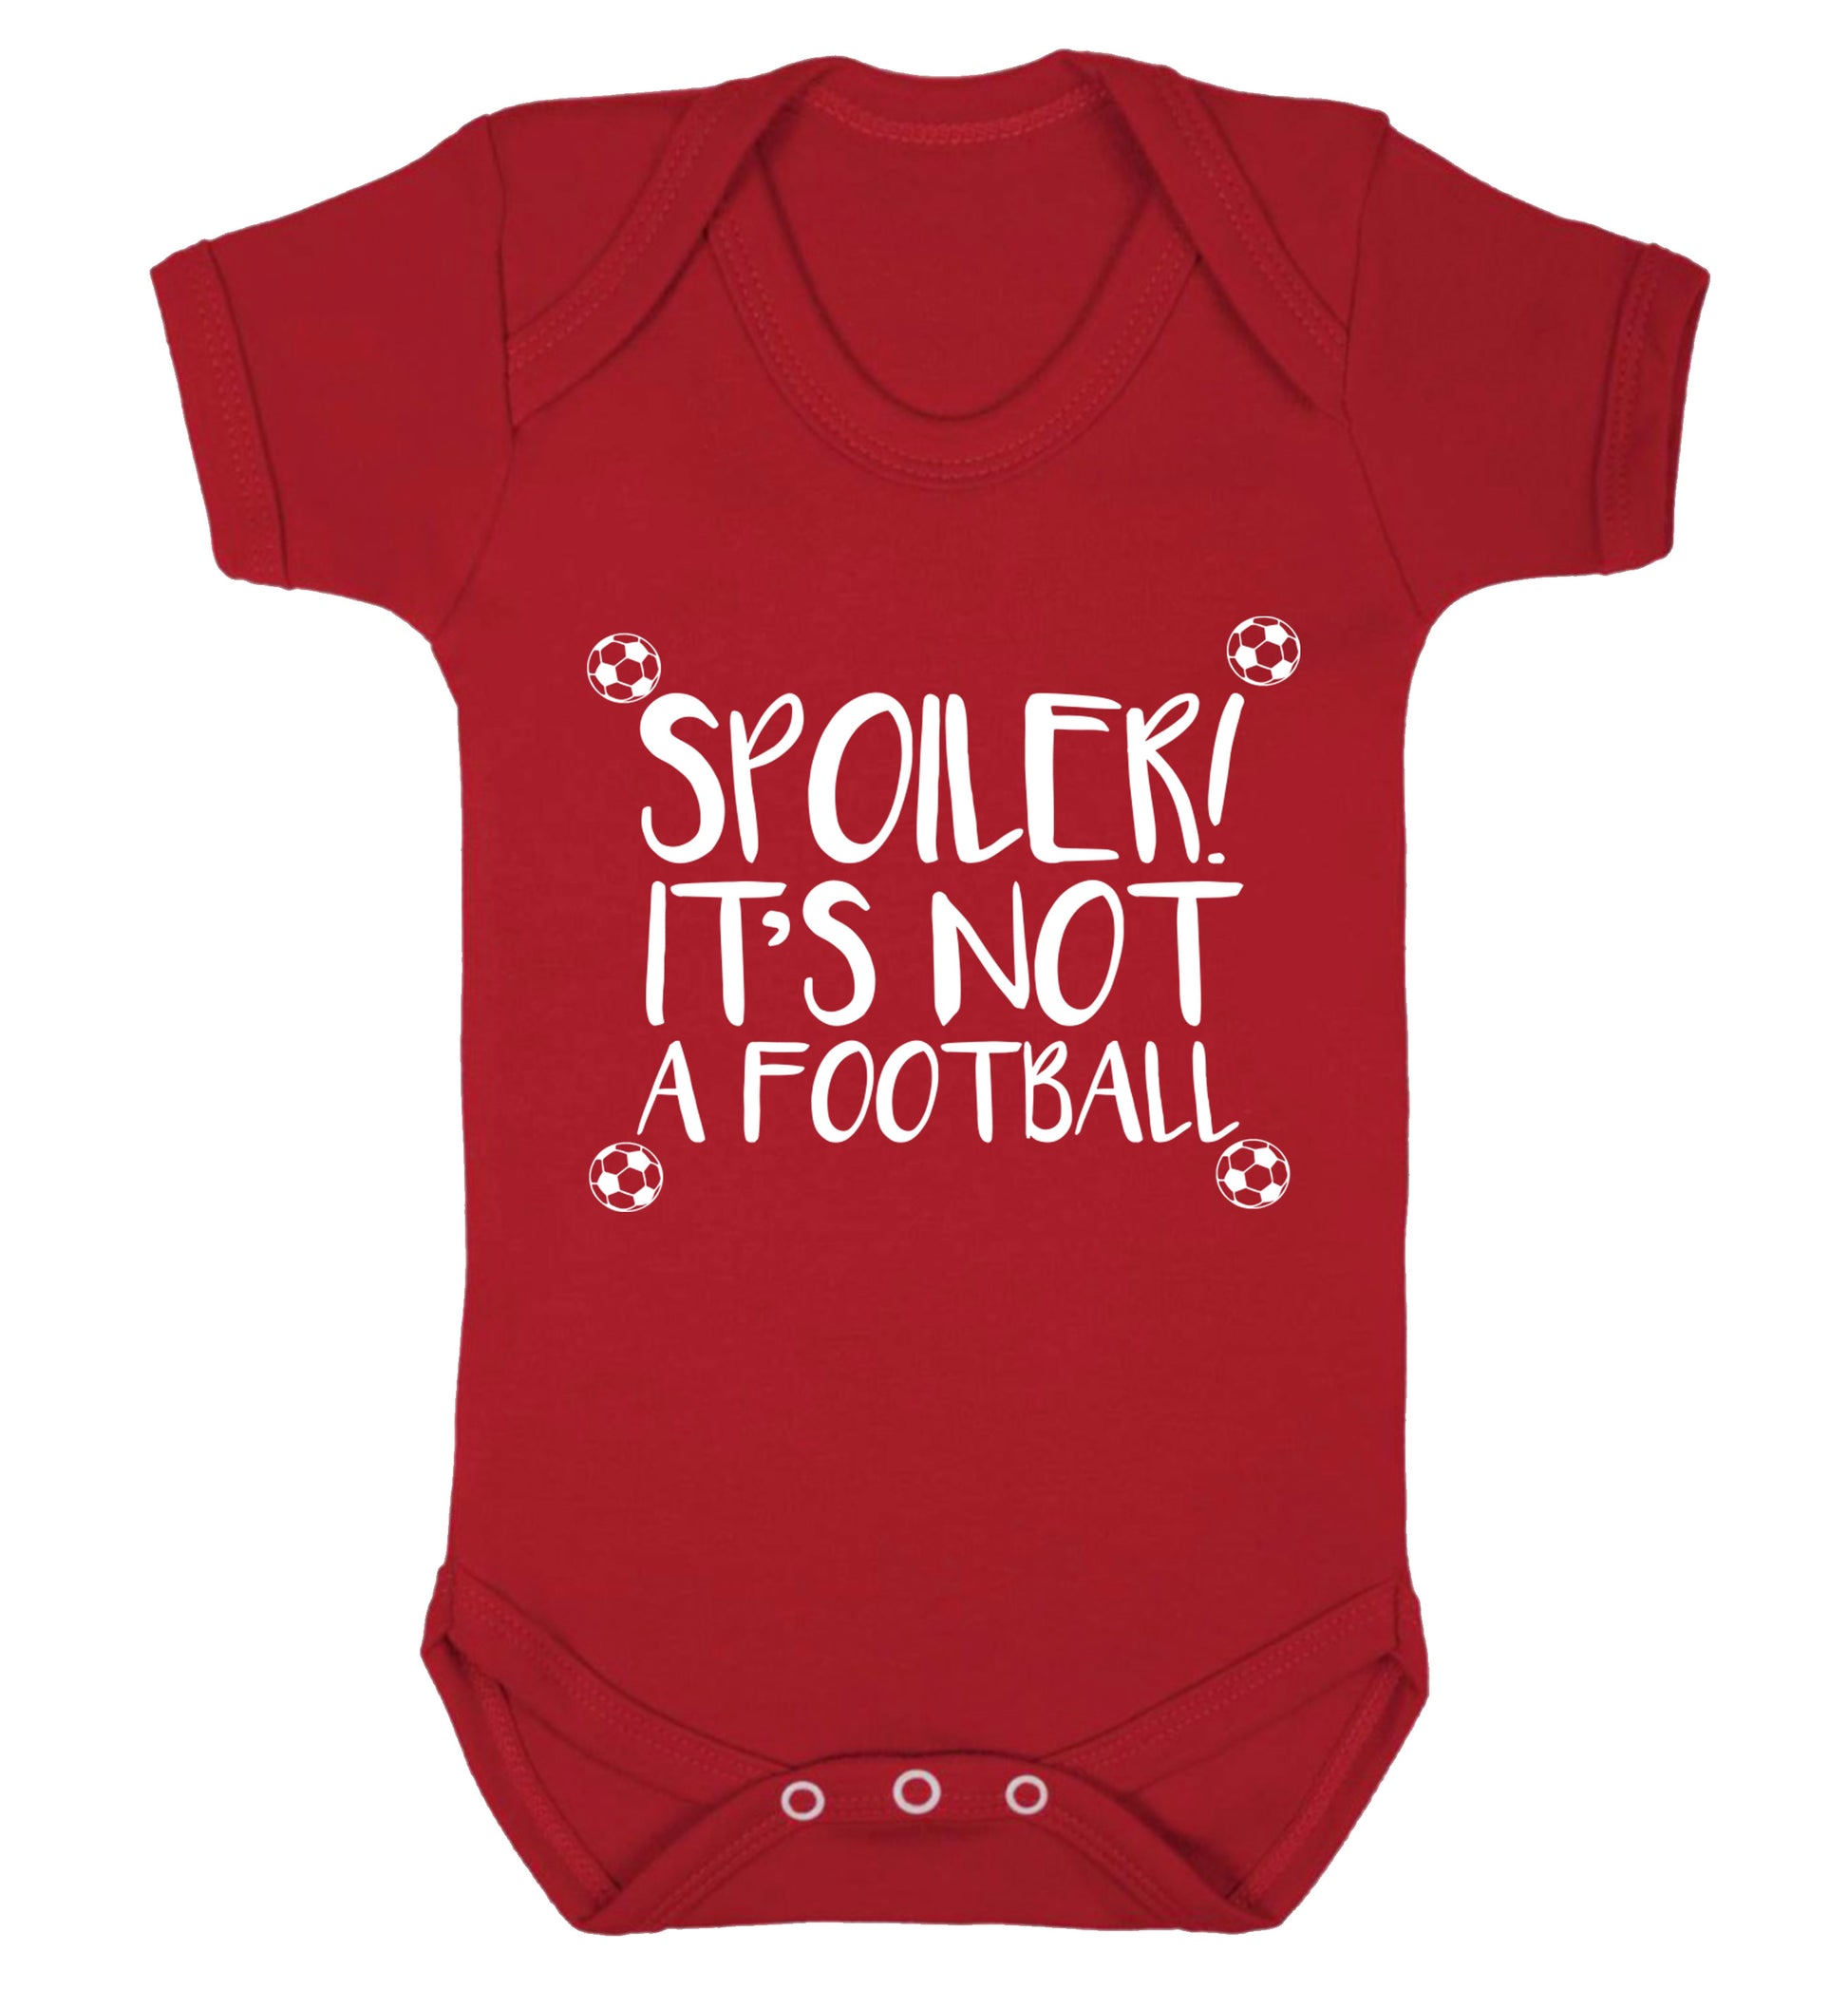 Spoiler it's not a football Baby Vest red 18-24 months